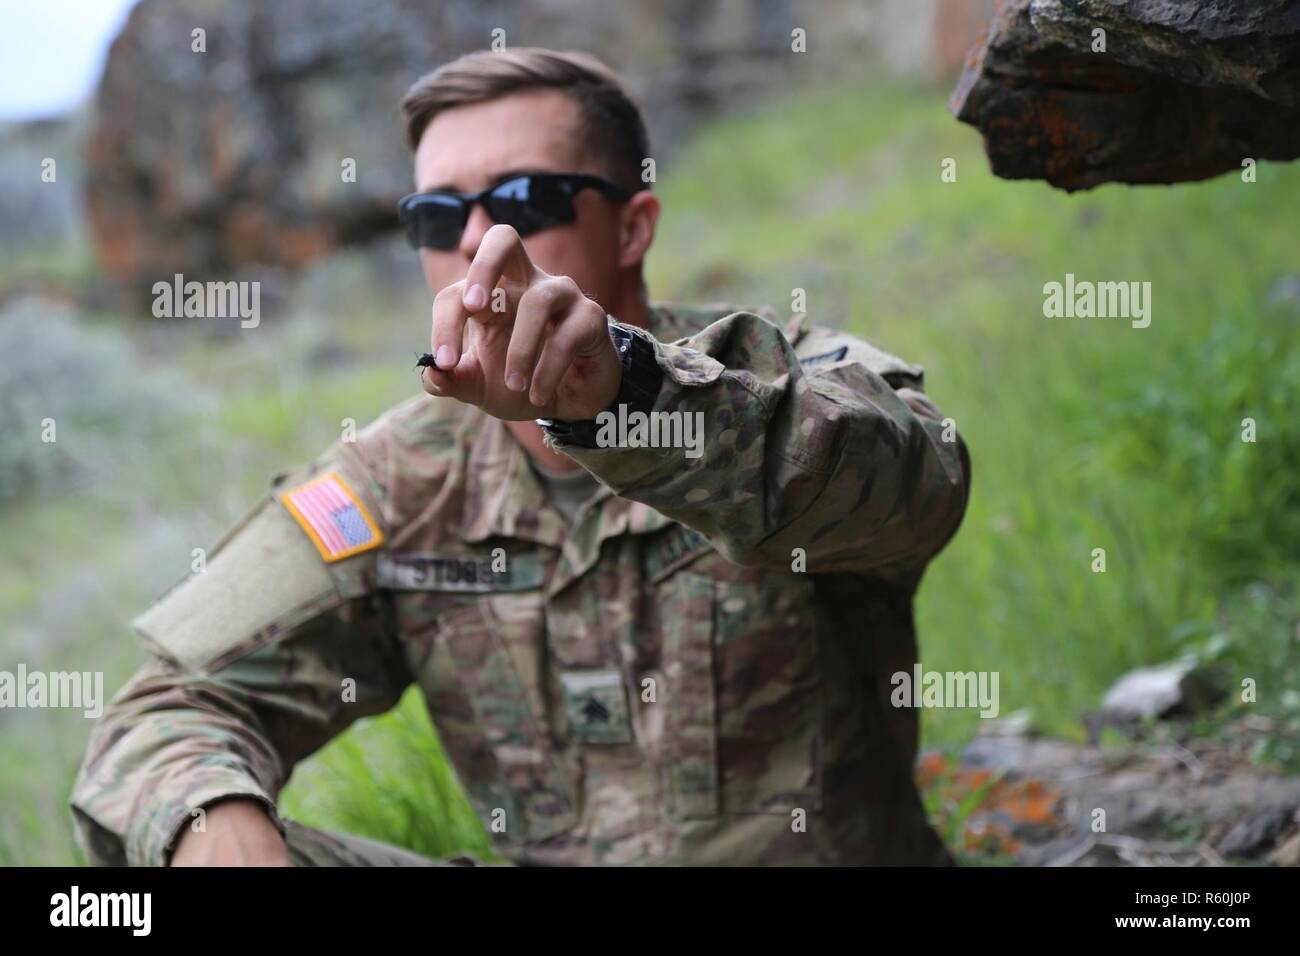 U.S. Army Sgt. Brandon Stubbs, 756th Ordnance Company (EOD), 184th Ordnance Battalion (EOD), 52nd Ordnance Group (EOD), holds a beetle that he found during a Survival, Evasion, Resistance, and Escape class at the Yakima Training Center, Yakima, Wash., April 25, 2017. Soldiers from 20th CBRNE Command's survival training focused on the five basic needs for desert conditions. Stock Photo